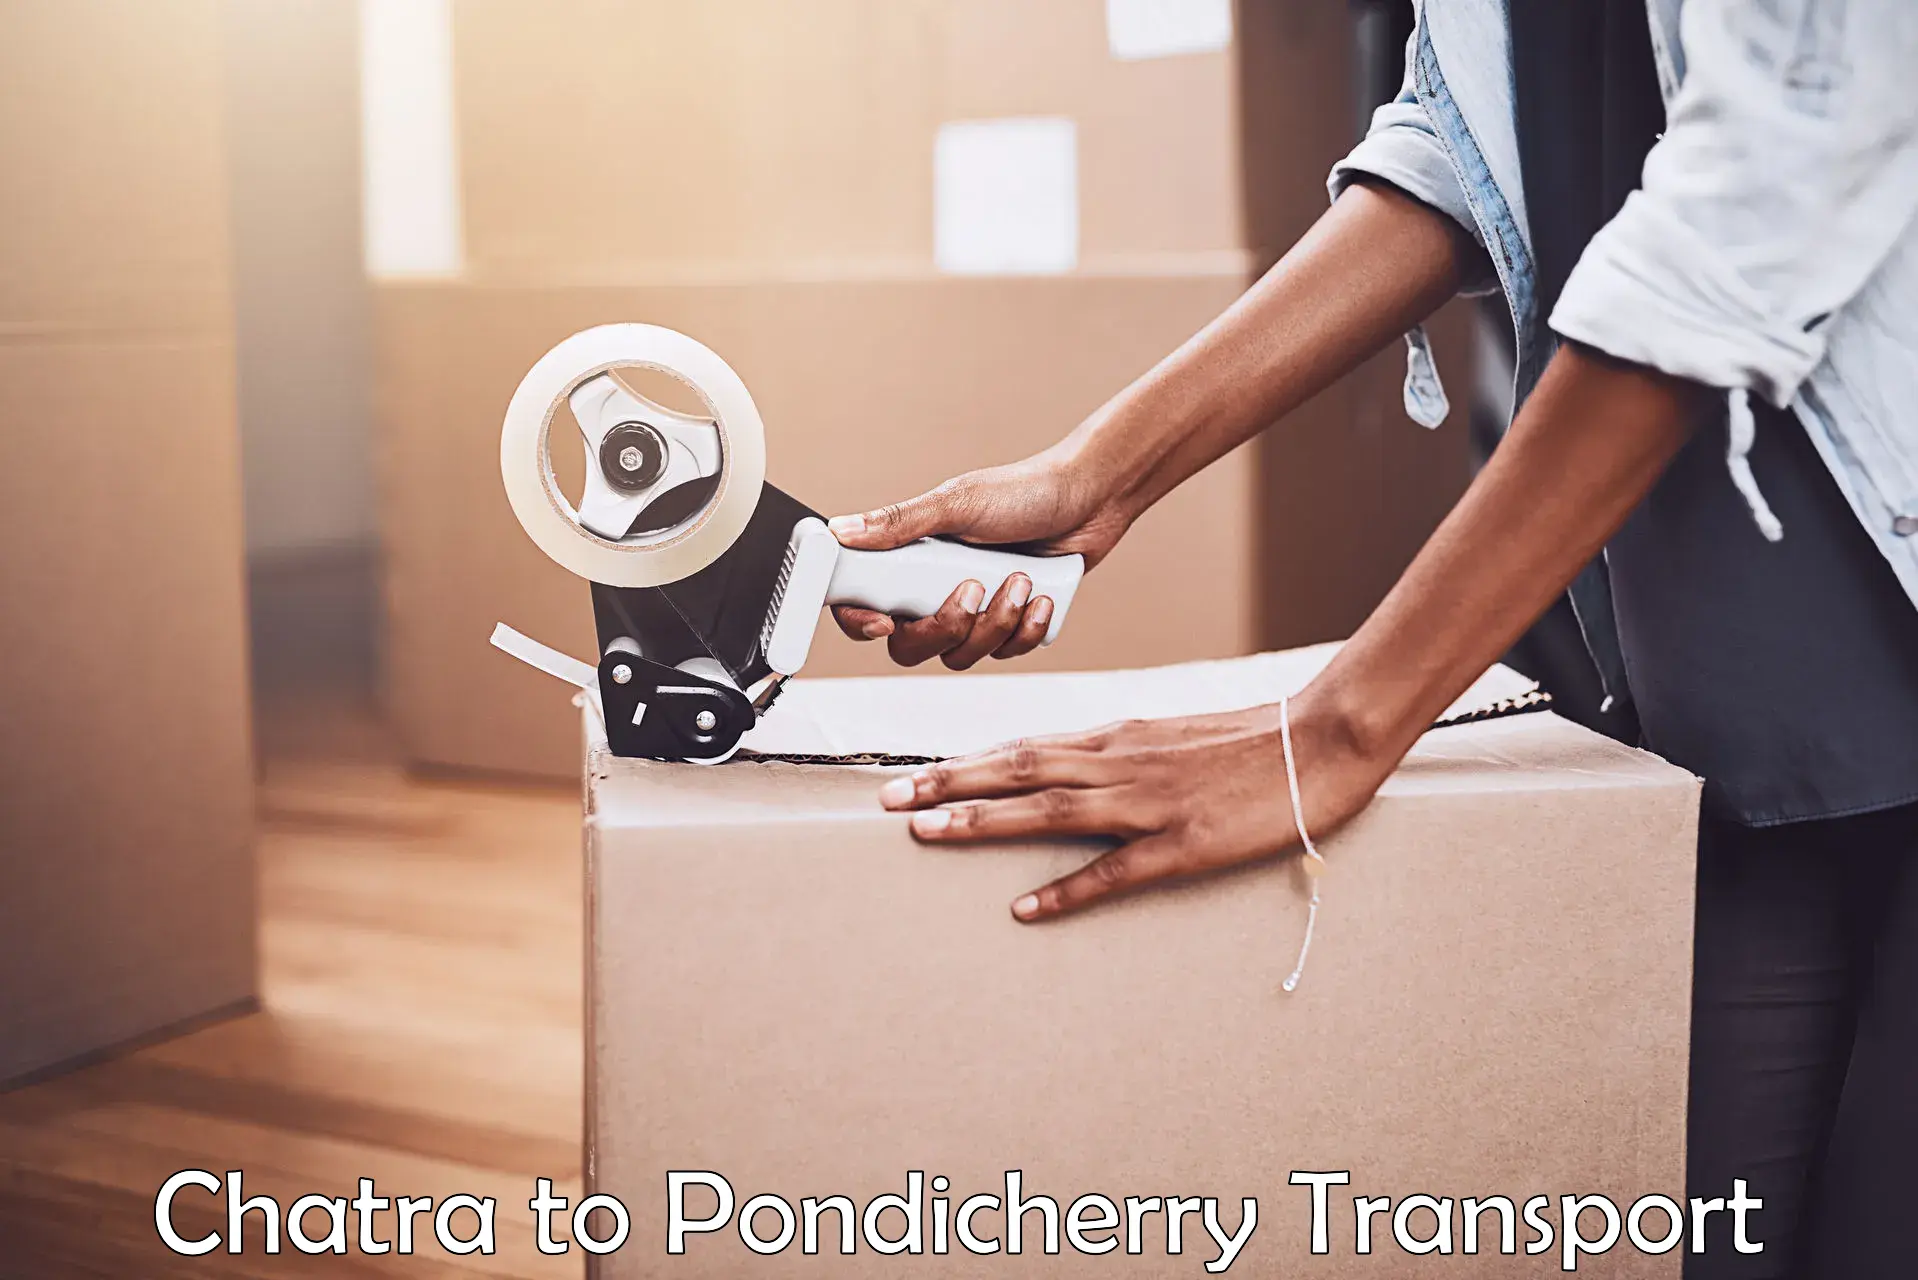 Transport in sharing Chatra to Pondicherry